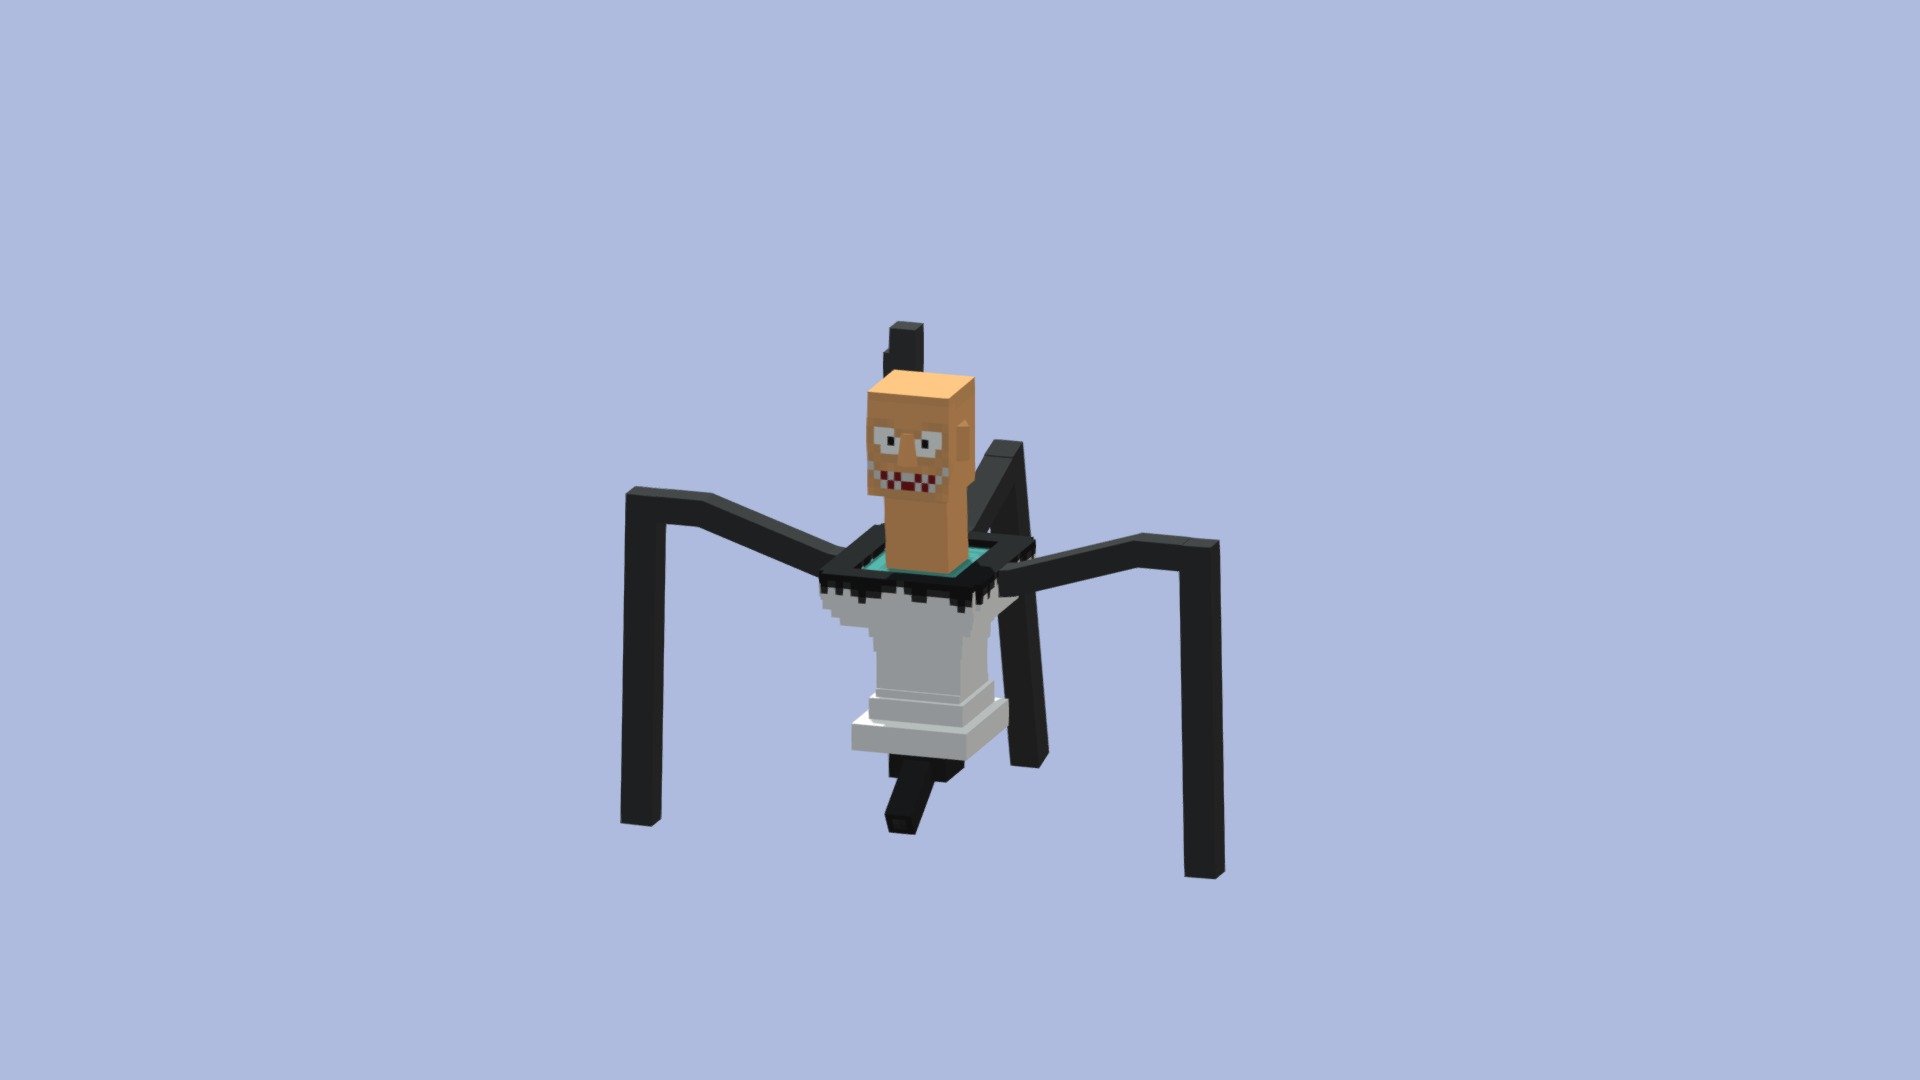 Skibidi Toilet Strider from Skibidi Toilet, Made in blockbench for minecraft bedrock edition but you can also transfer it to java 3d model